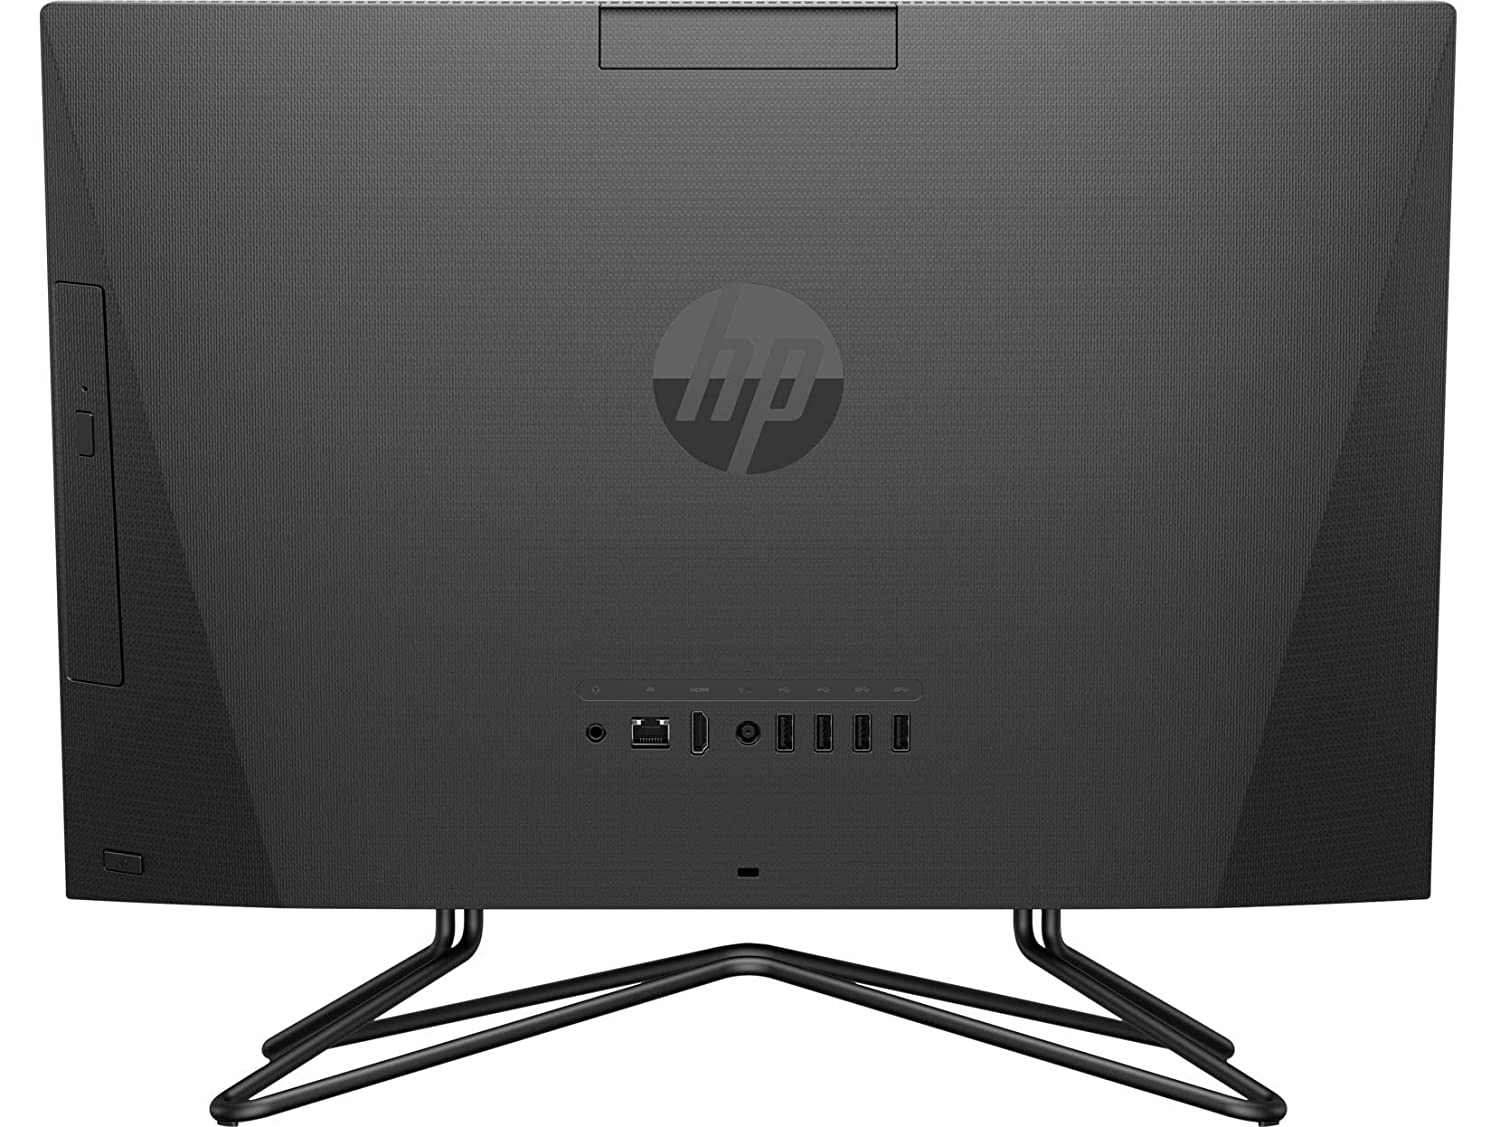 HP 200 G3 All In One PC  4LW46PA